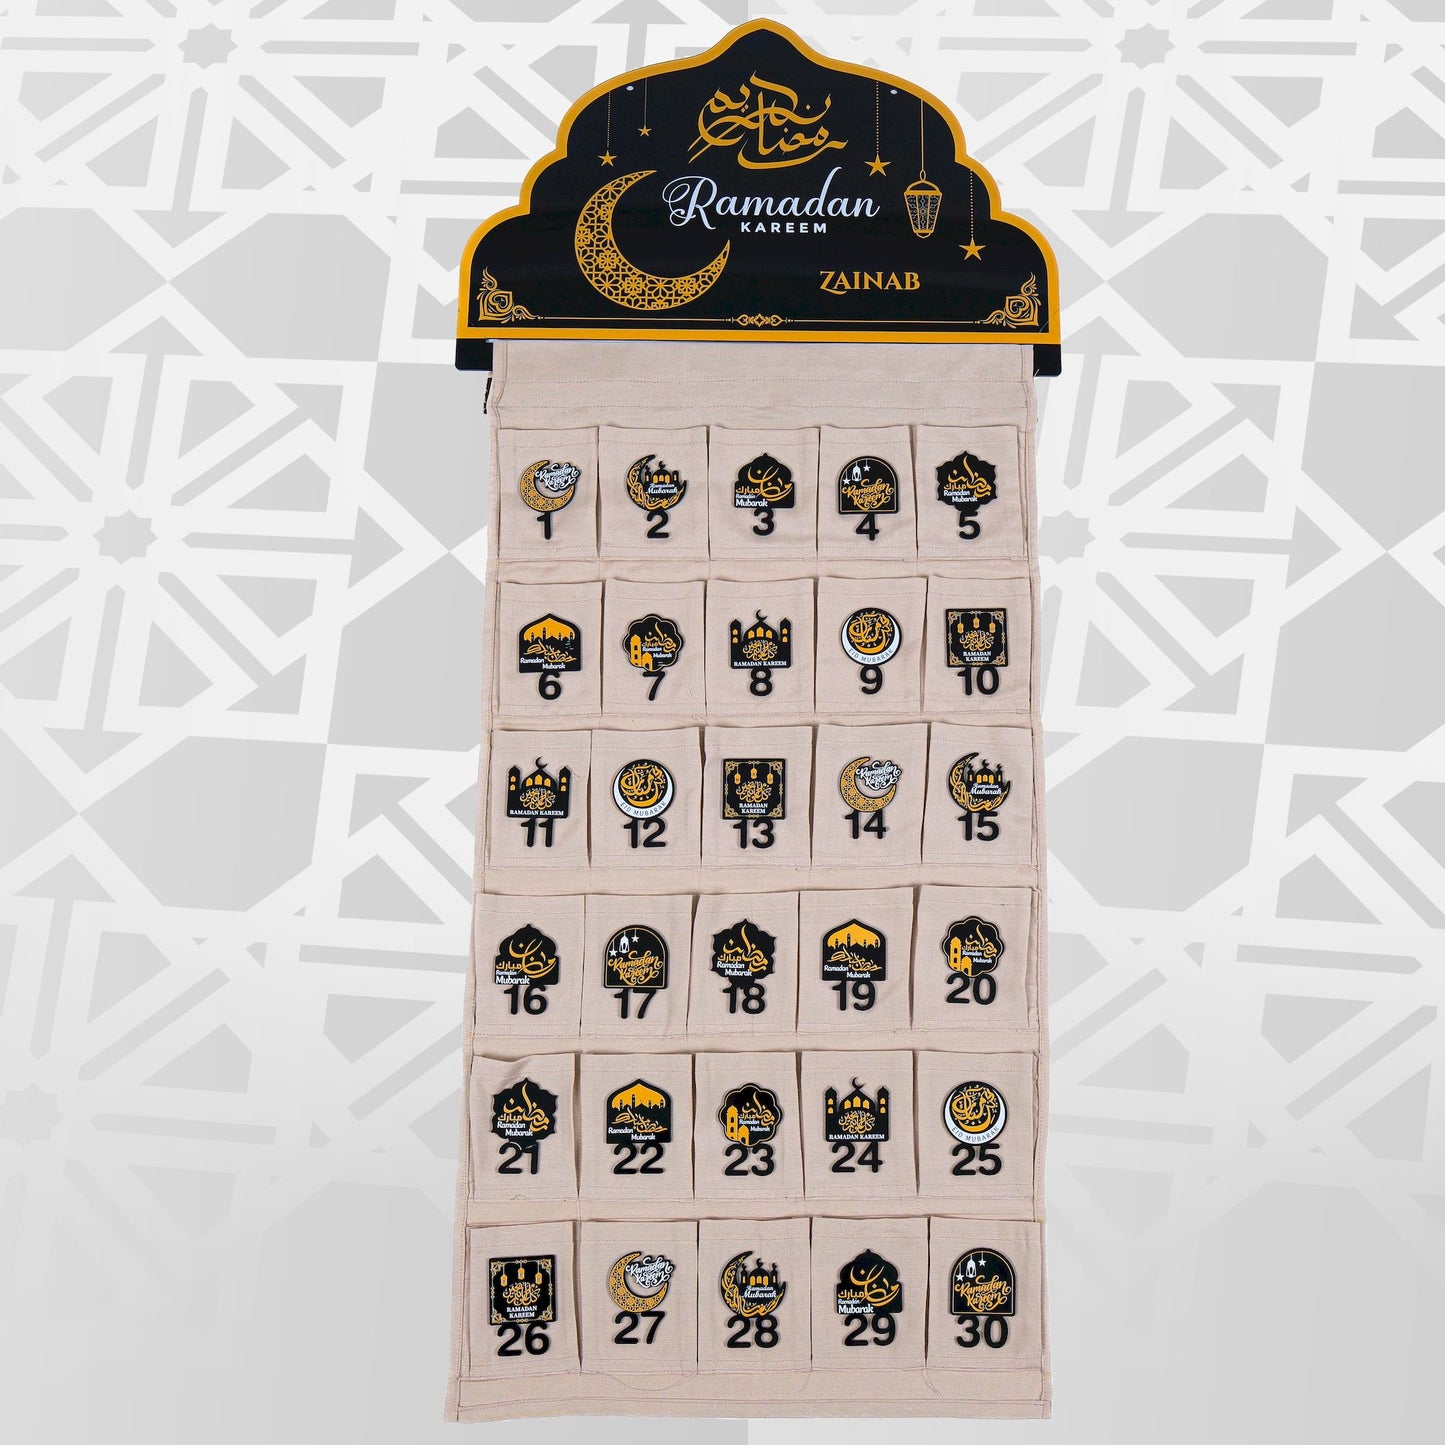 Personalized Fabric Canvas Ramadan Advent Calendar Home Decor Eid Gift - Islamic Elite Favors is a handmade gift shop offering a wide variety of unique and personalized gifts for all occasions. Whether you're looking for the perfect Ramadan, Eid, Hajj, wedding gift or something special for a birthday, baby shower or anniversary, we have something for everyone. High quality, made with love.